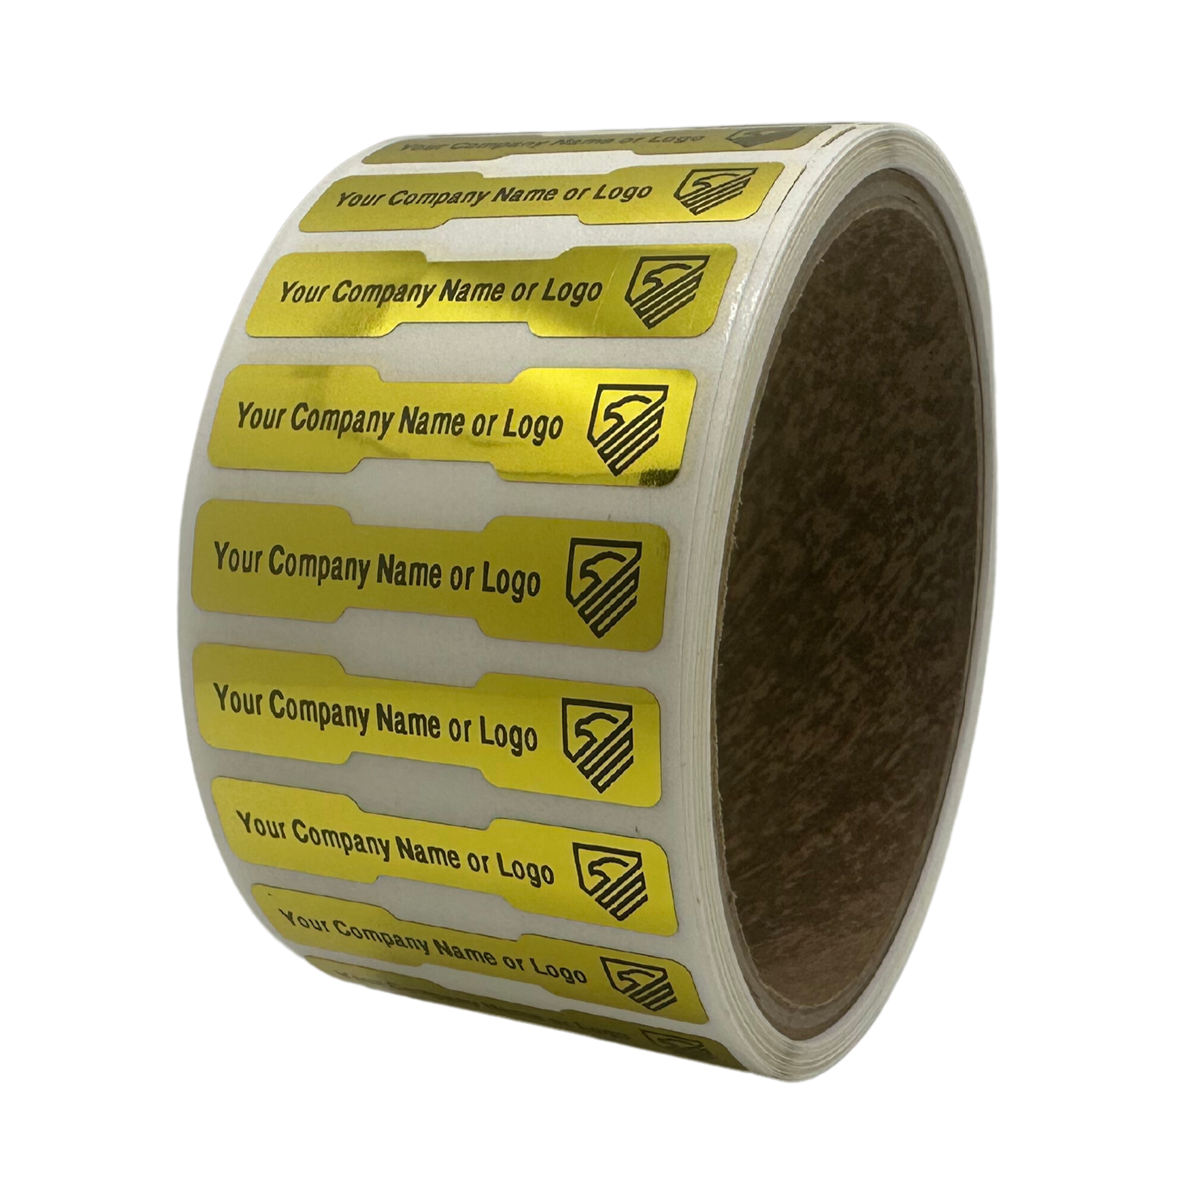 2,000 Tamper Evident Security Labels Gold TamperVoidPro Seal Sticker, Dogbone Shape Size 1.75" x 0.375 (44mm x 9mm). Custom Printed. >Click on item details to customize.